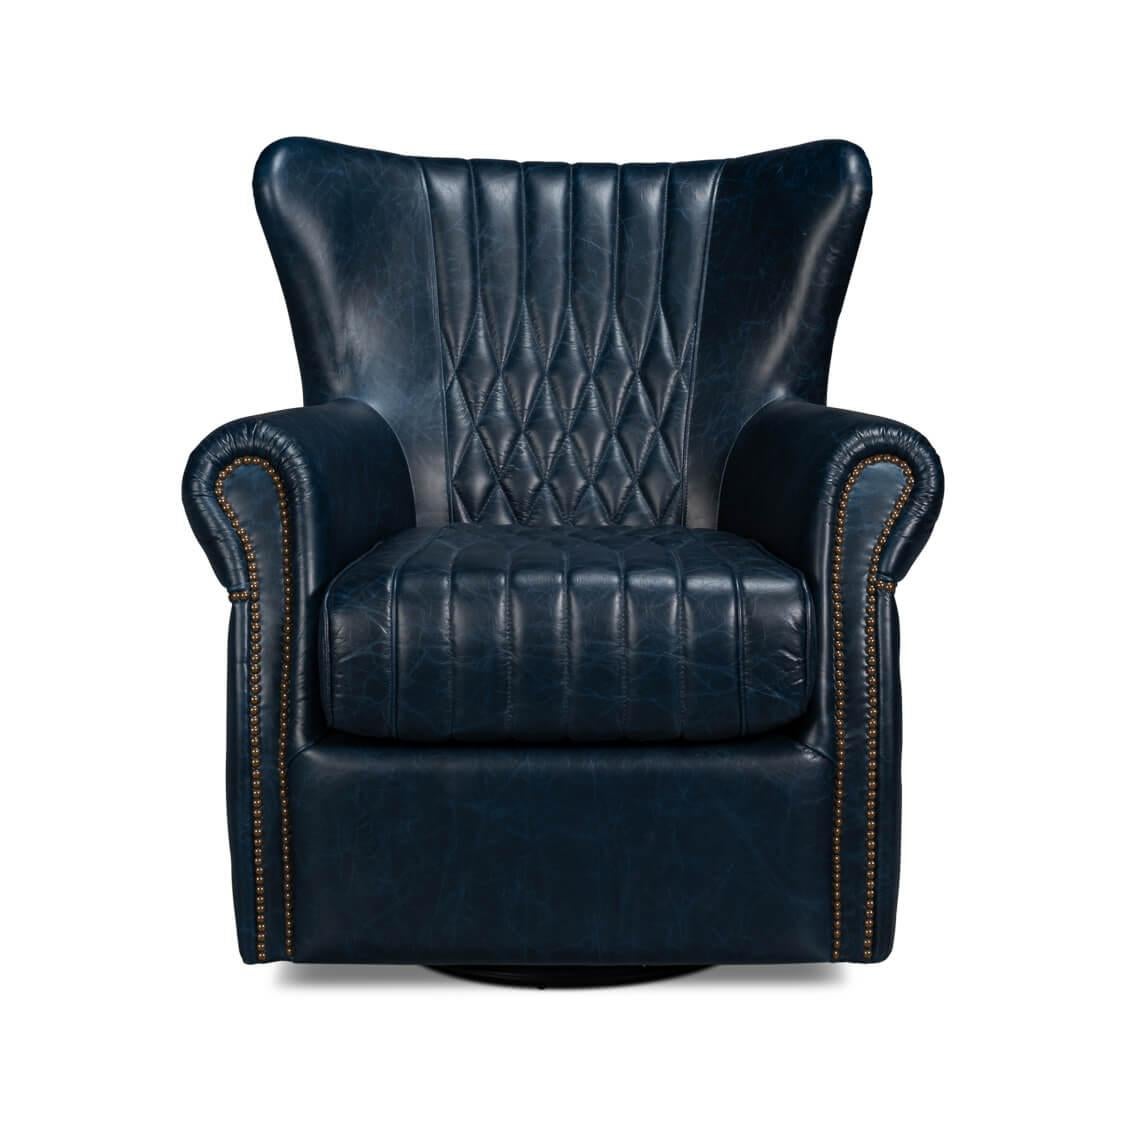 A masterpiece that encapsulates timeless charm and contemporary comfort. Crafted with high-quality Chateau Blue leather, it boasts iconic diamond quilting and channels that bring an air of aristocratic elegance to any room.

With a high winged